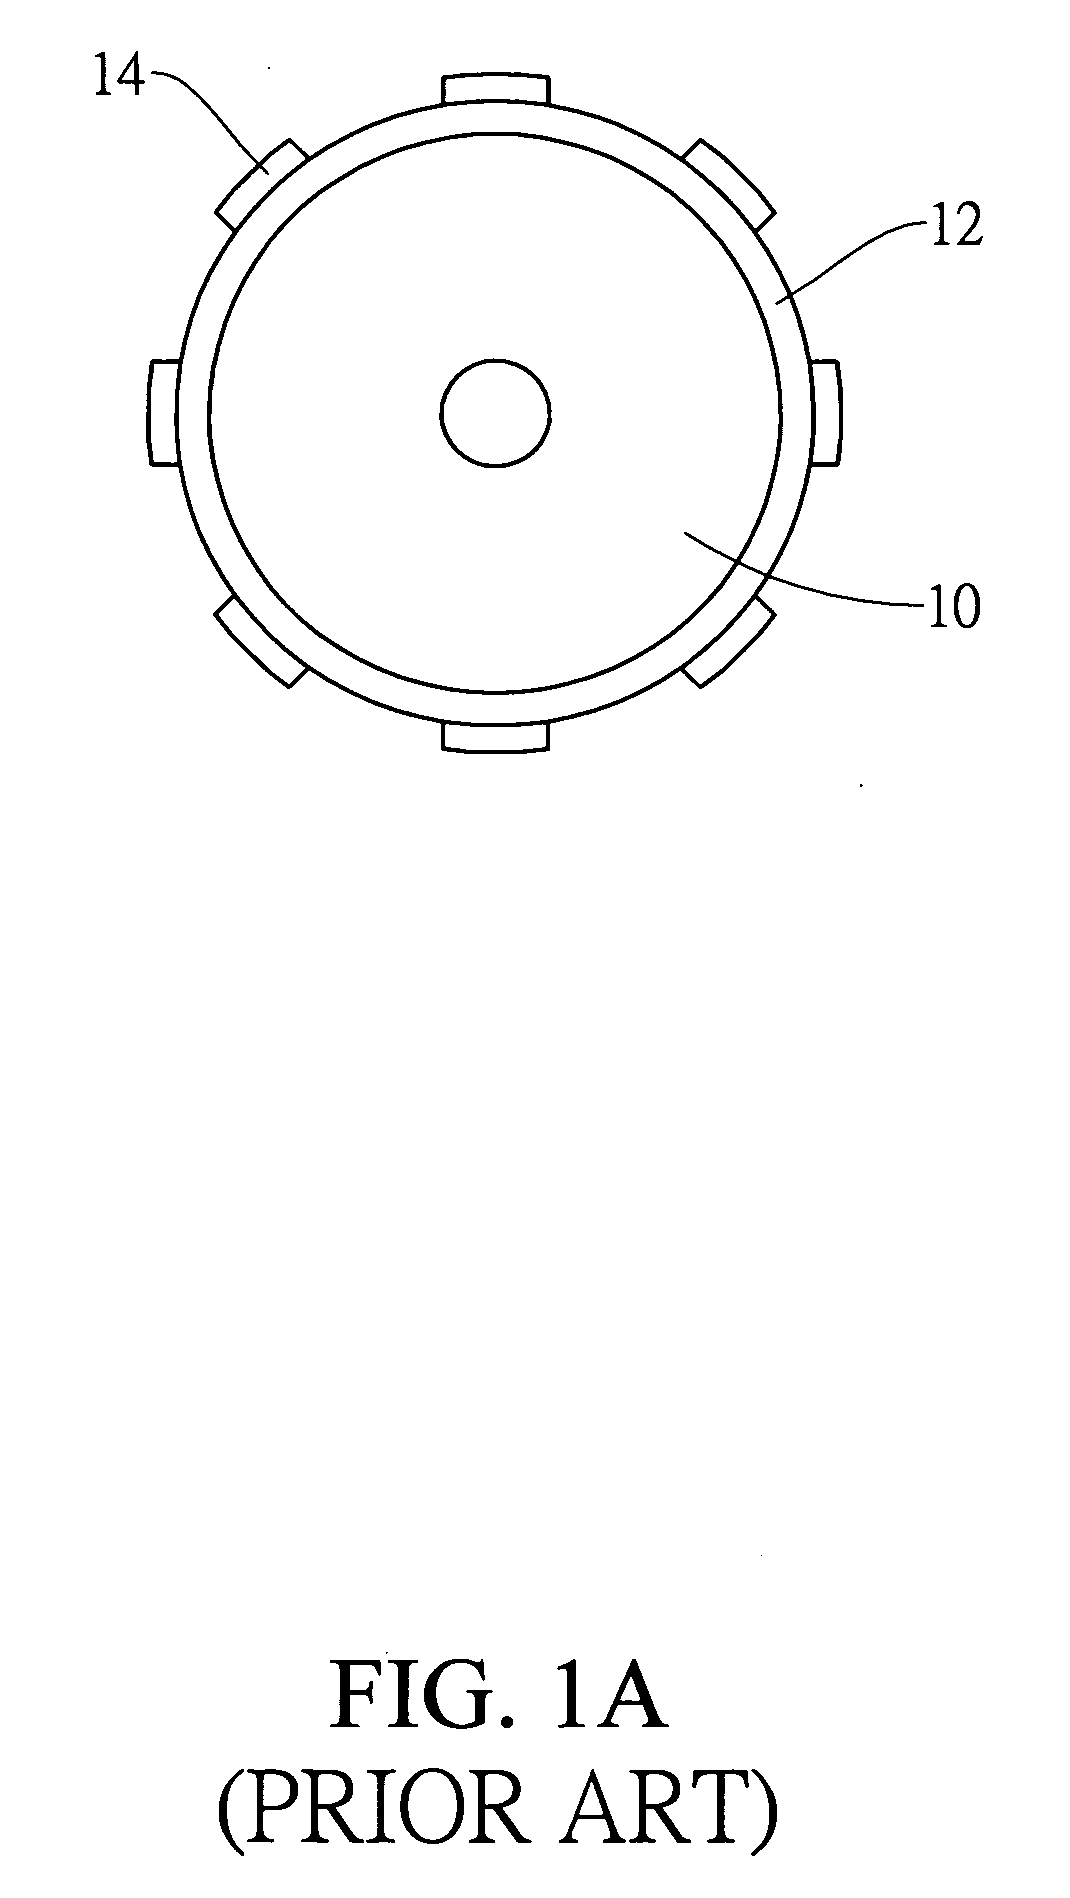 Microstructure roller, microstructure fabrication method, tool for fabricating a microstructure roller